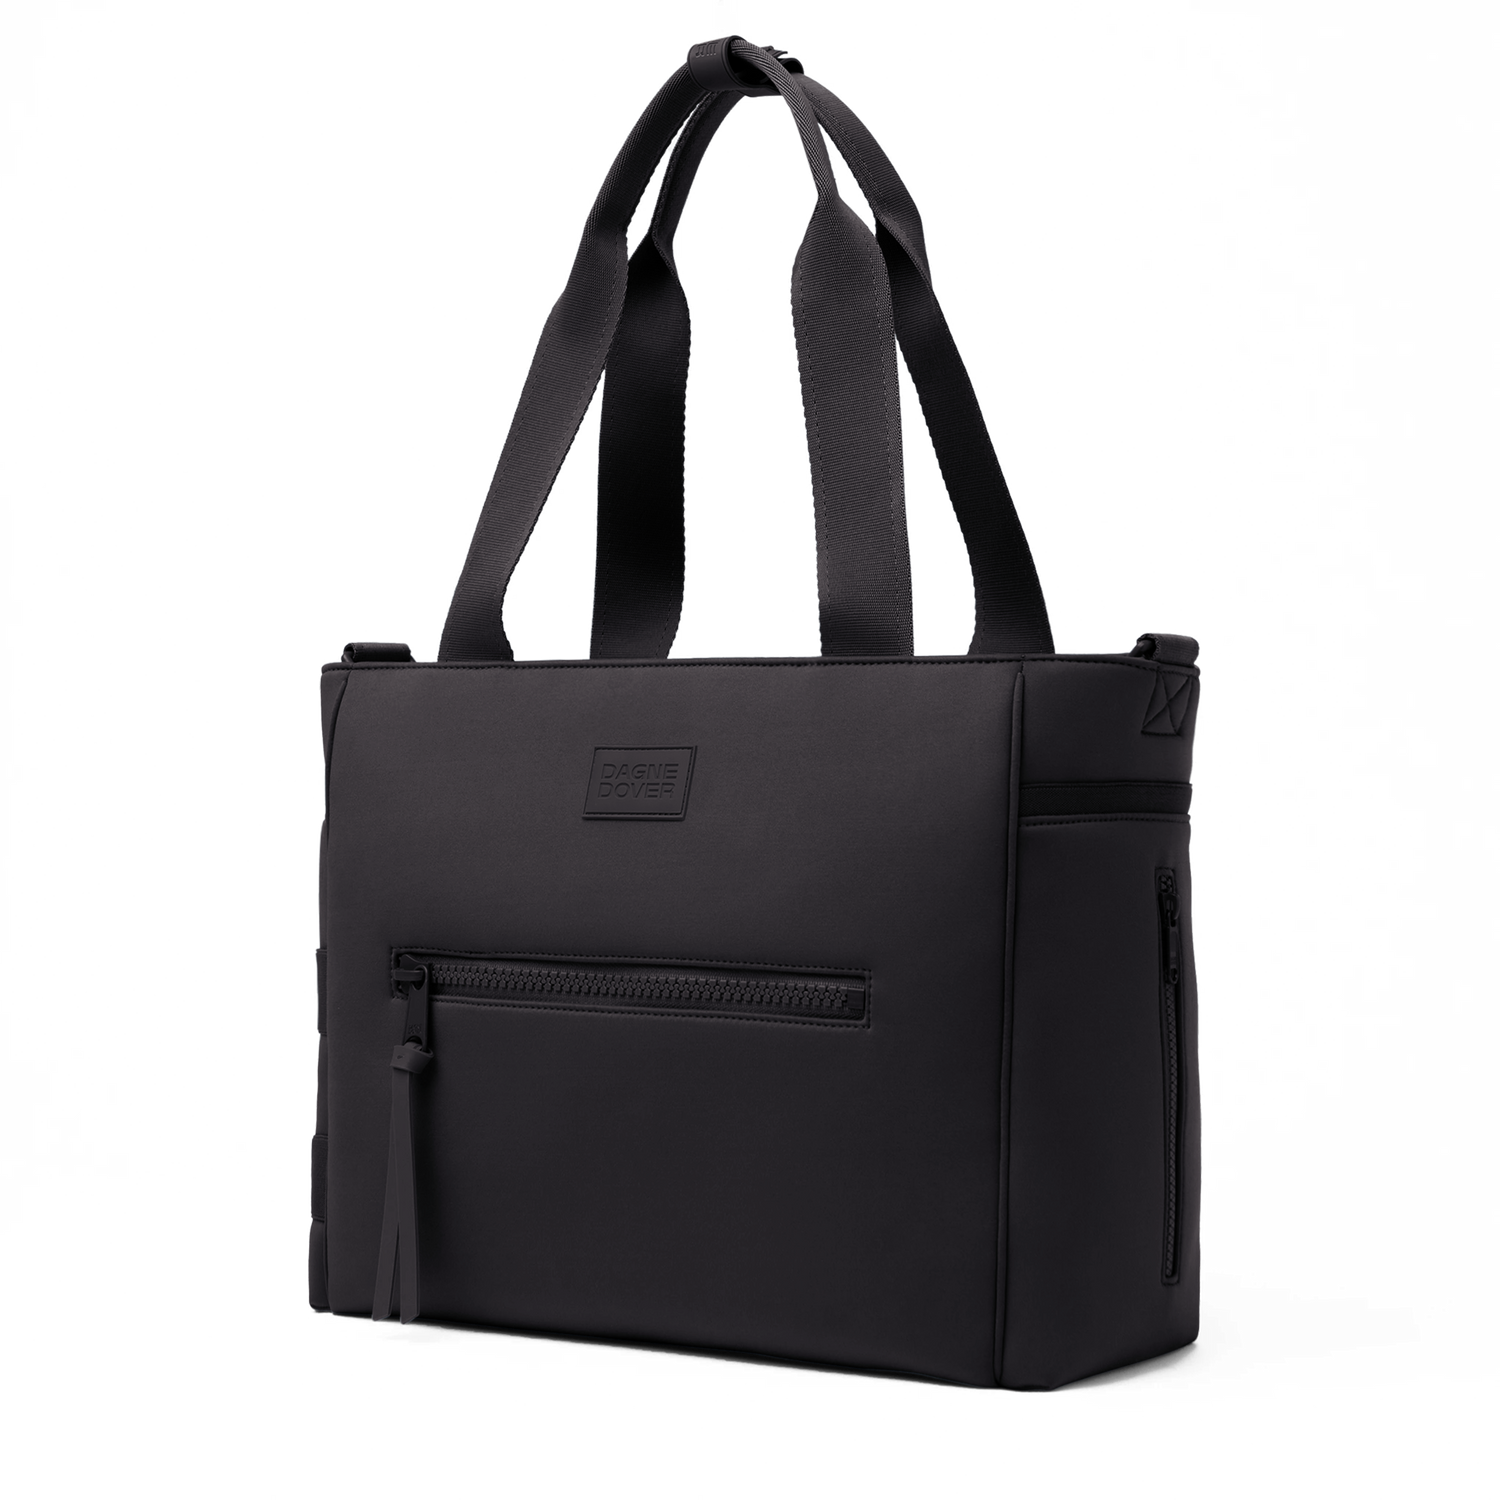 Wade Diaper Tote | Functional & Fashionable Diaper Bag | Dagne Dover